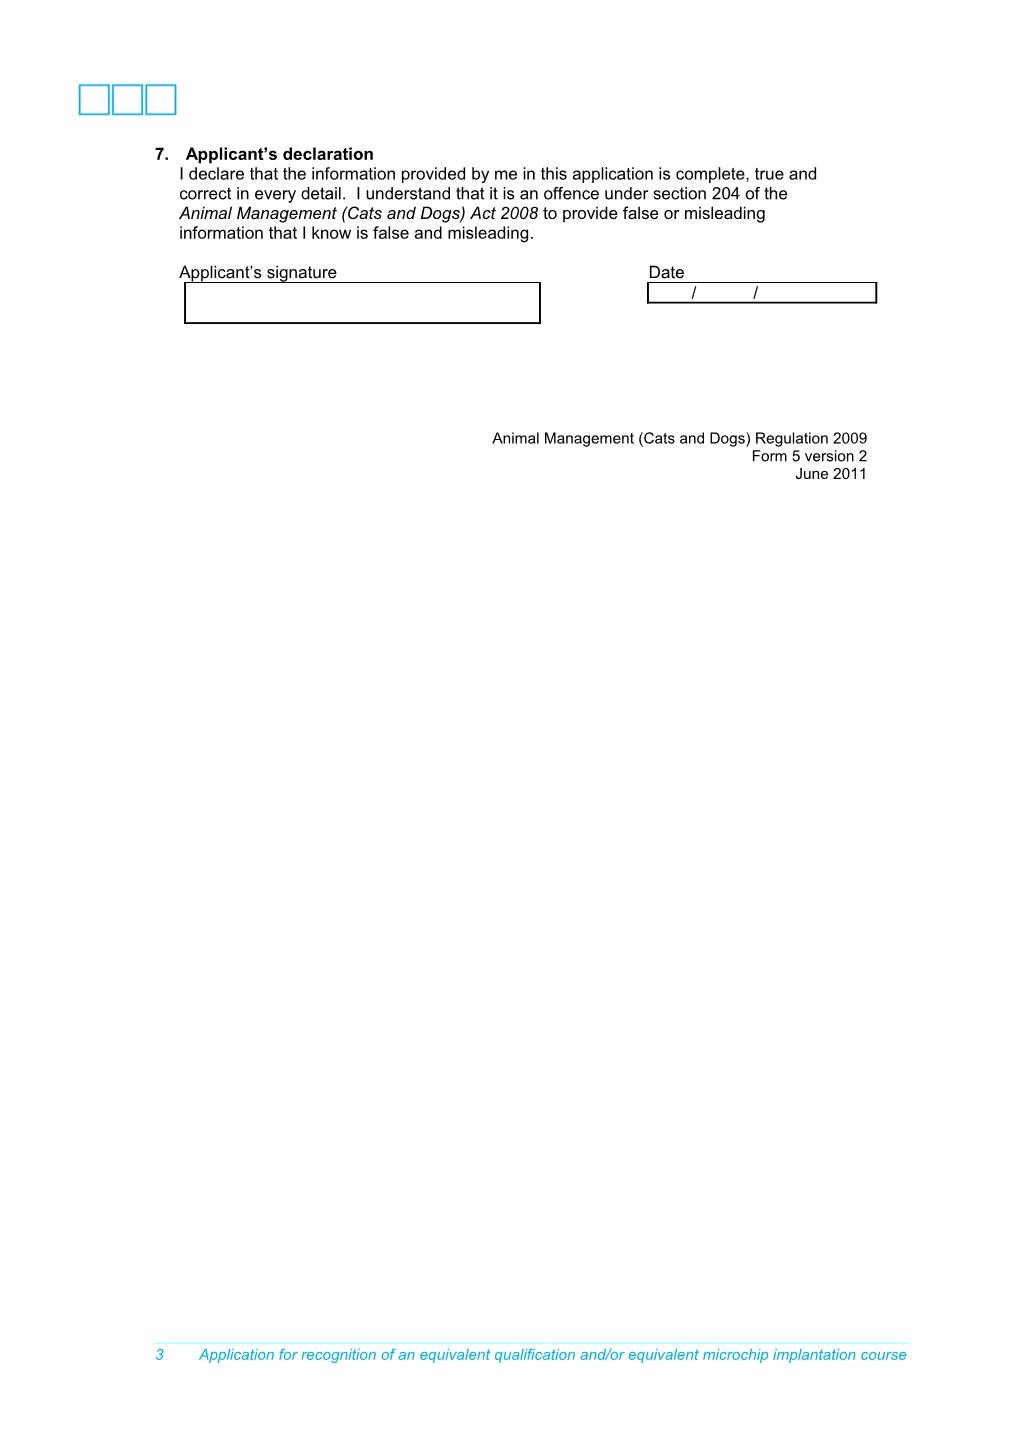 Application for Recognition of an Equivalent Qualification And/Or Equivalent Microchip